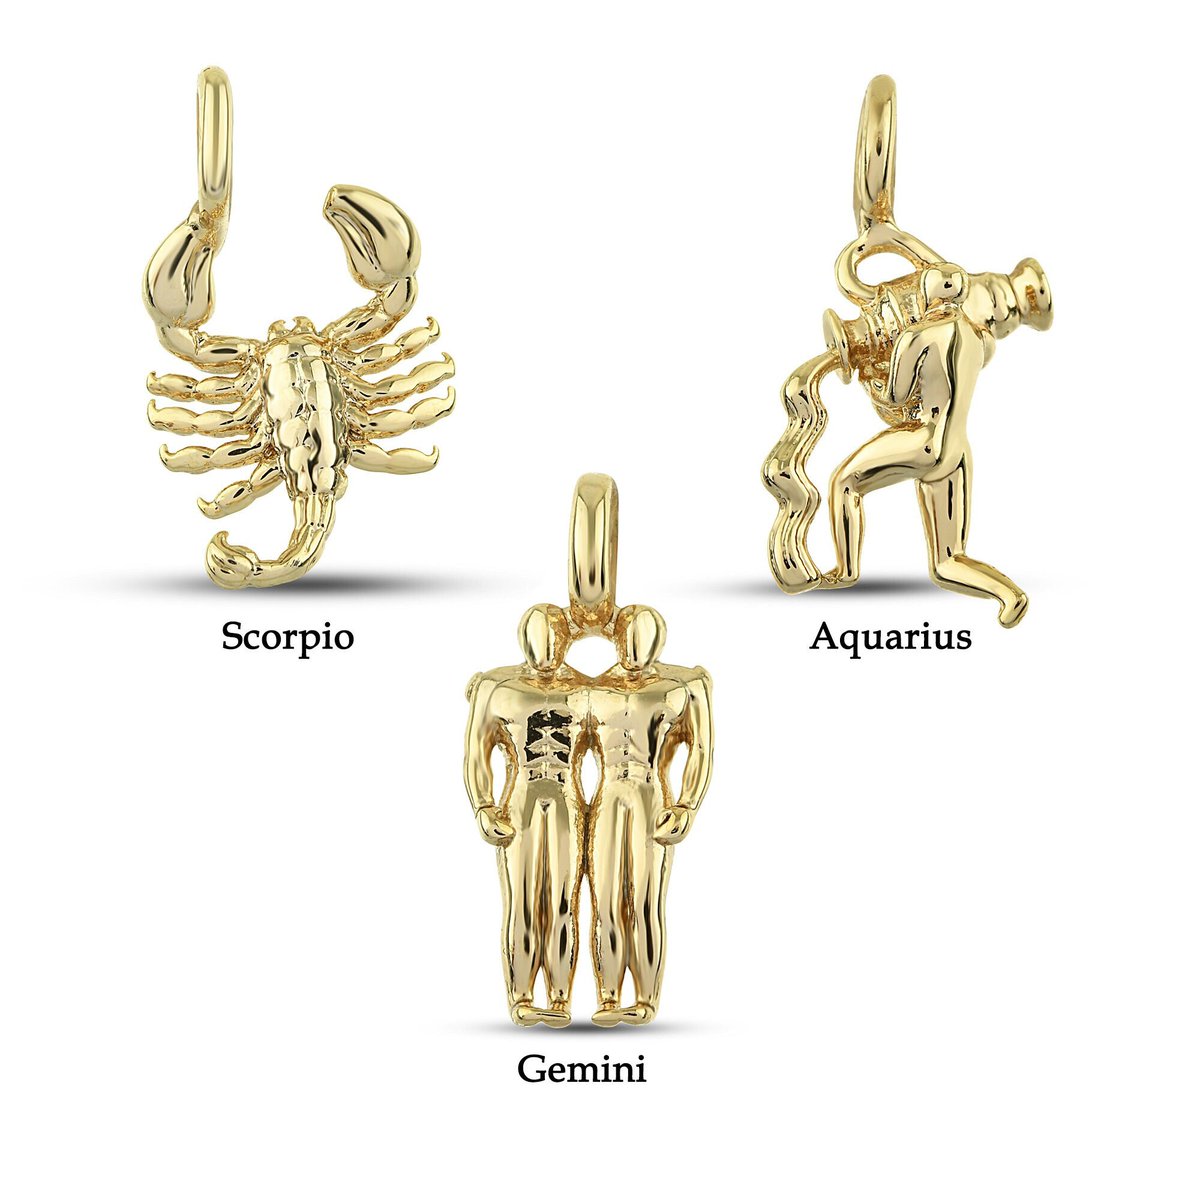 Zodiac Sign Charms - Gold Plated Astrology Horoscope Mini Charms etsy.me/42yLuTq #gold #brass #goldcharms #horoscopecharms #personalizedjewelry #charmbracelet #custombracelet #zodiaccharms #zodiacjewelry